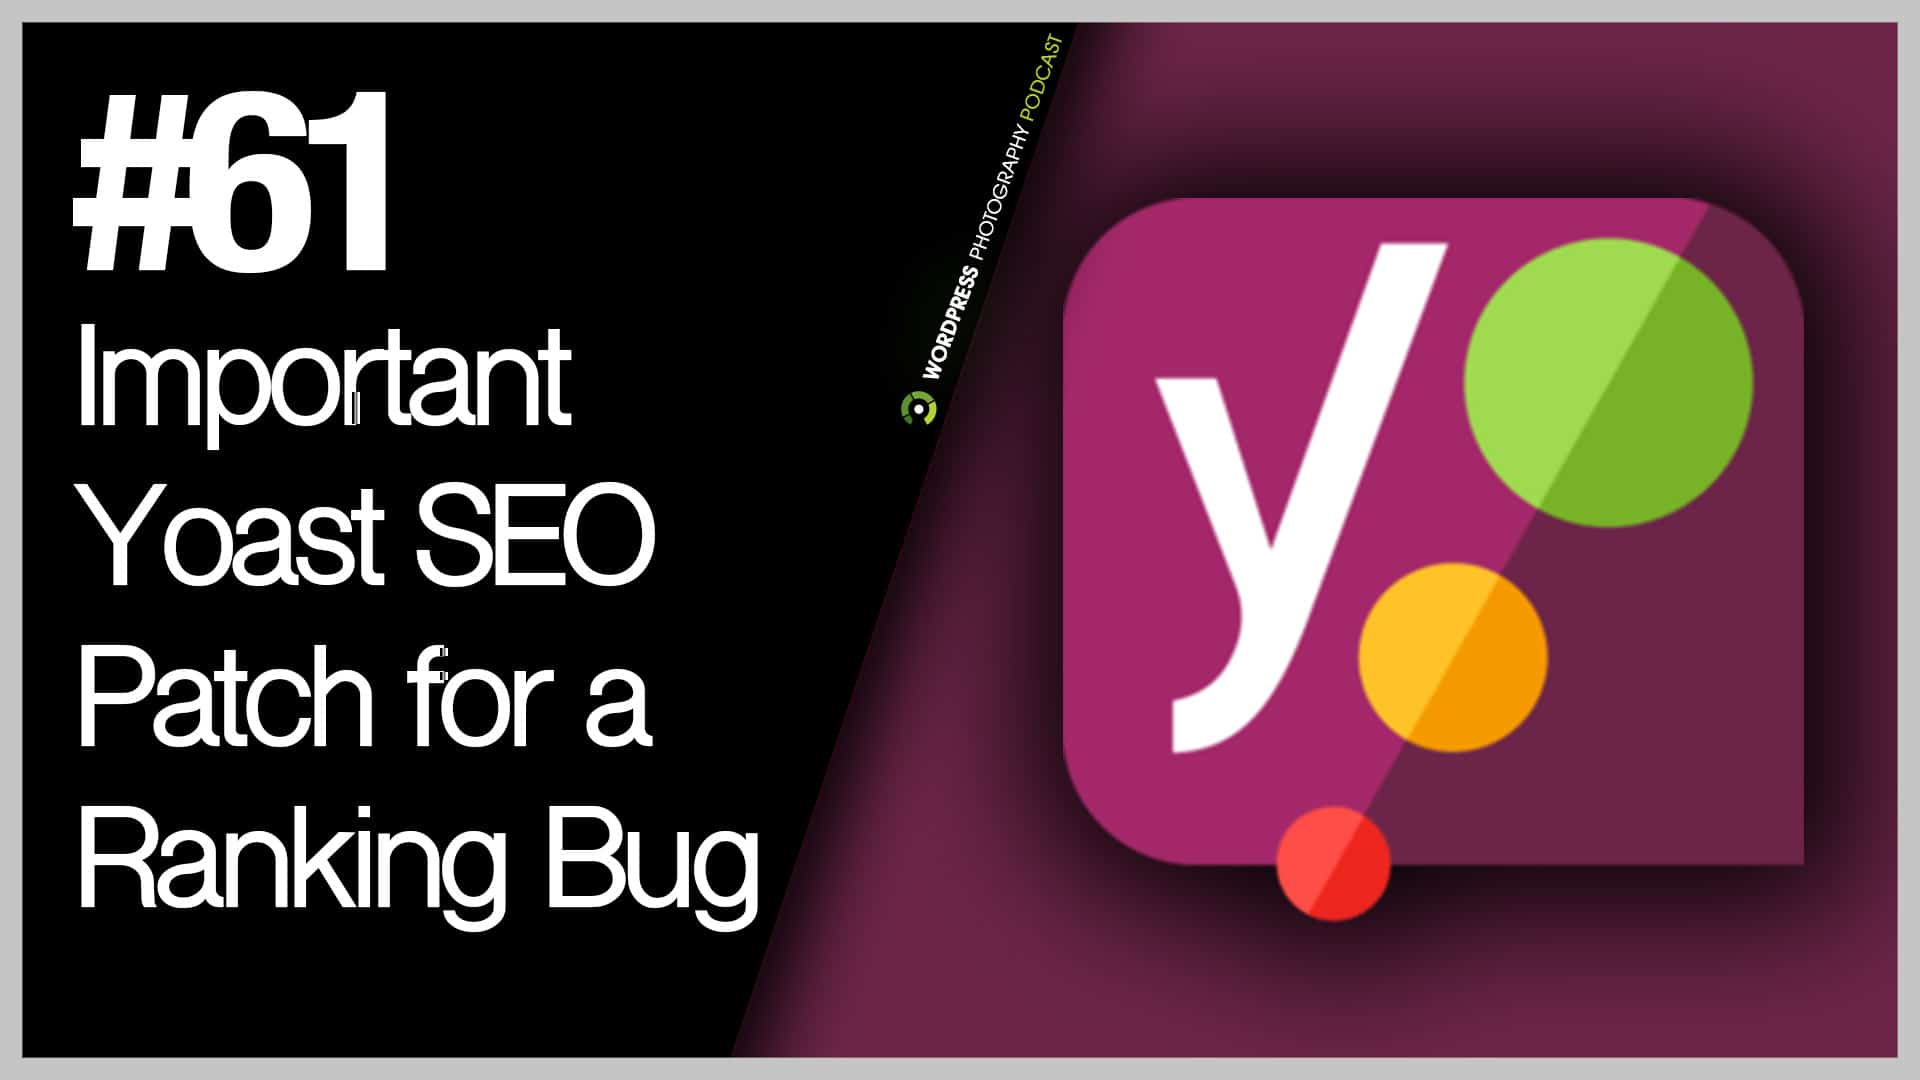 Episode 61 – Important Yoast SEO Patch for a Ranking Bug